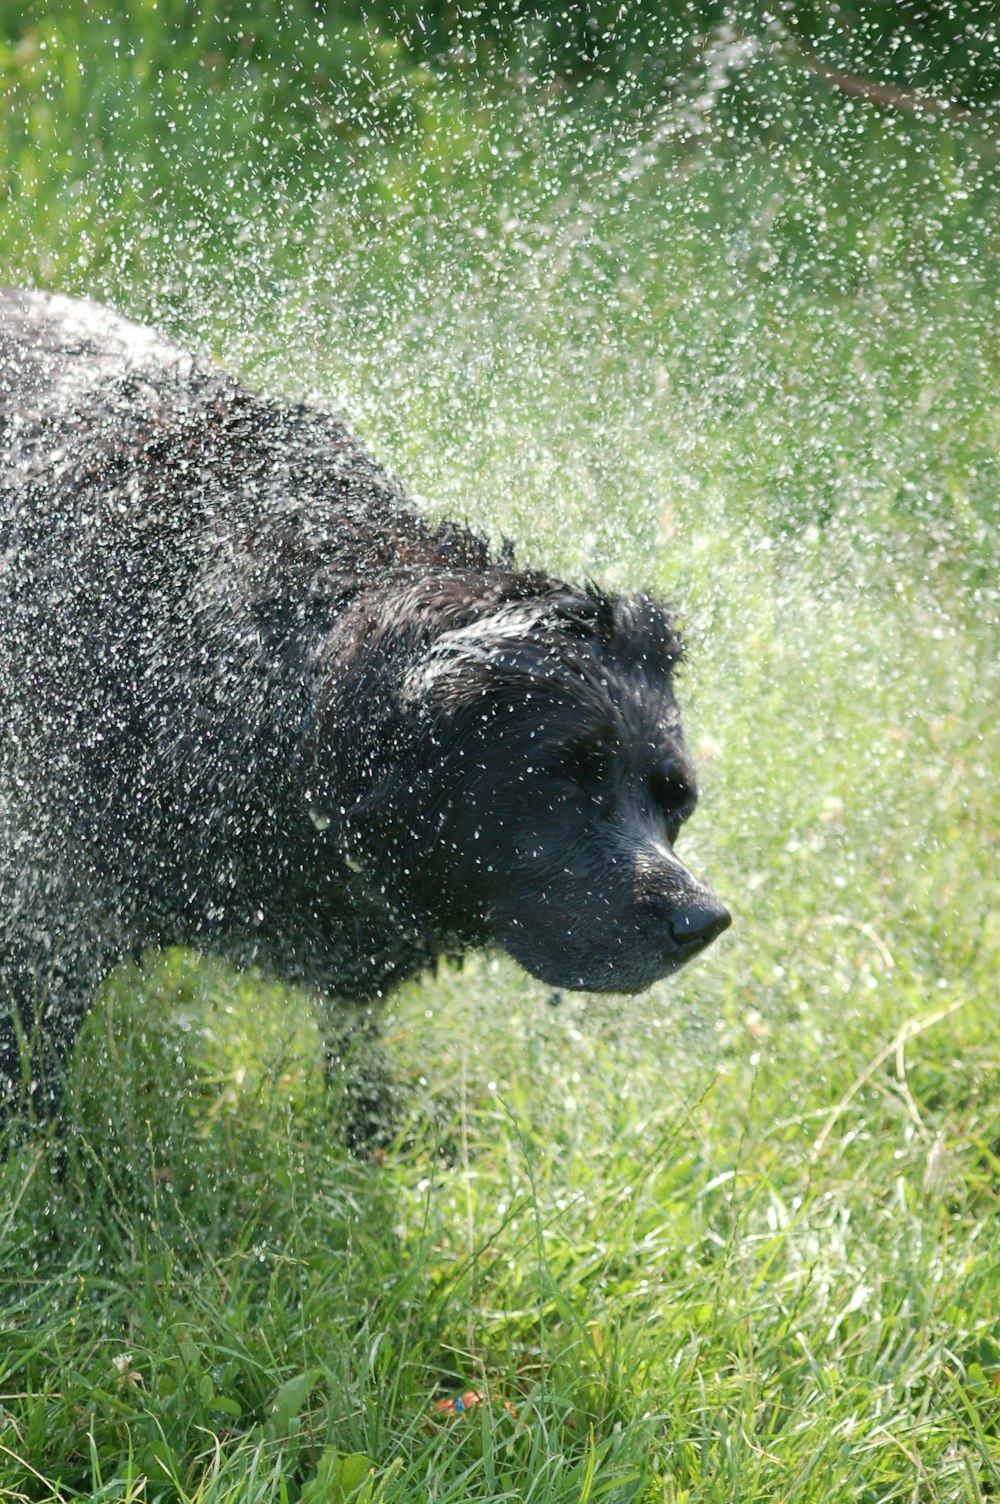 a black dog sprinkles water on its face